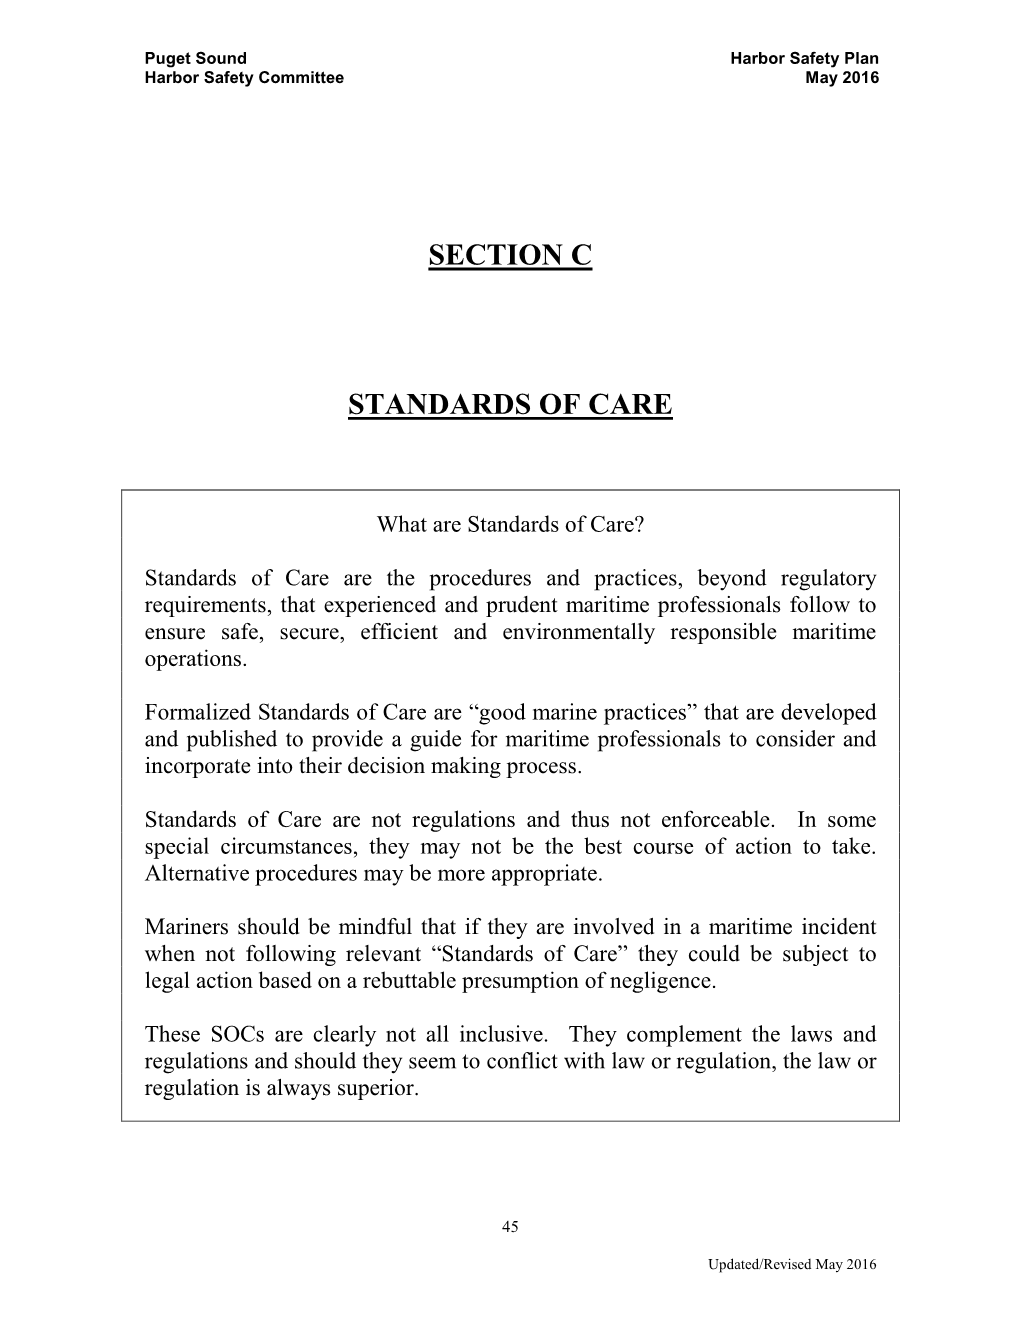 Section C Standards of Care